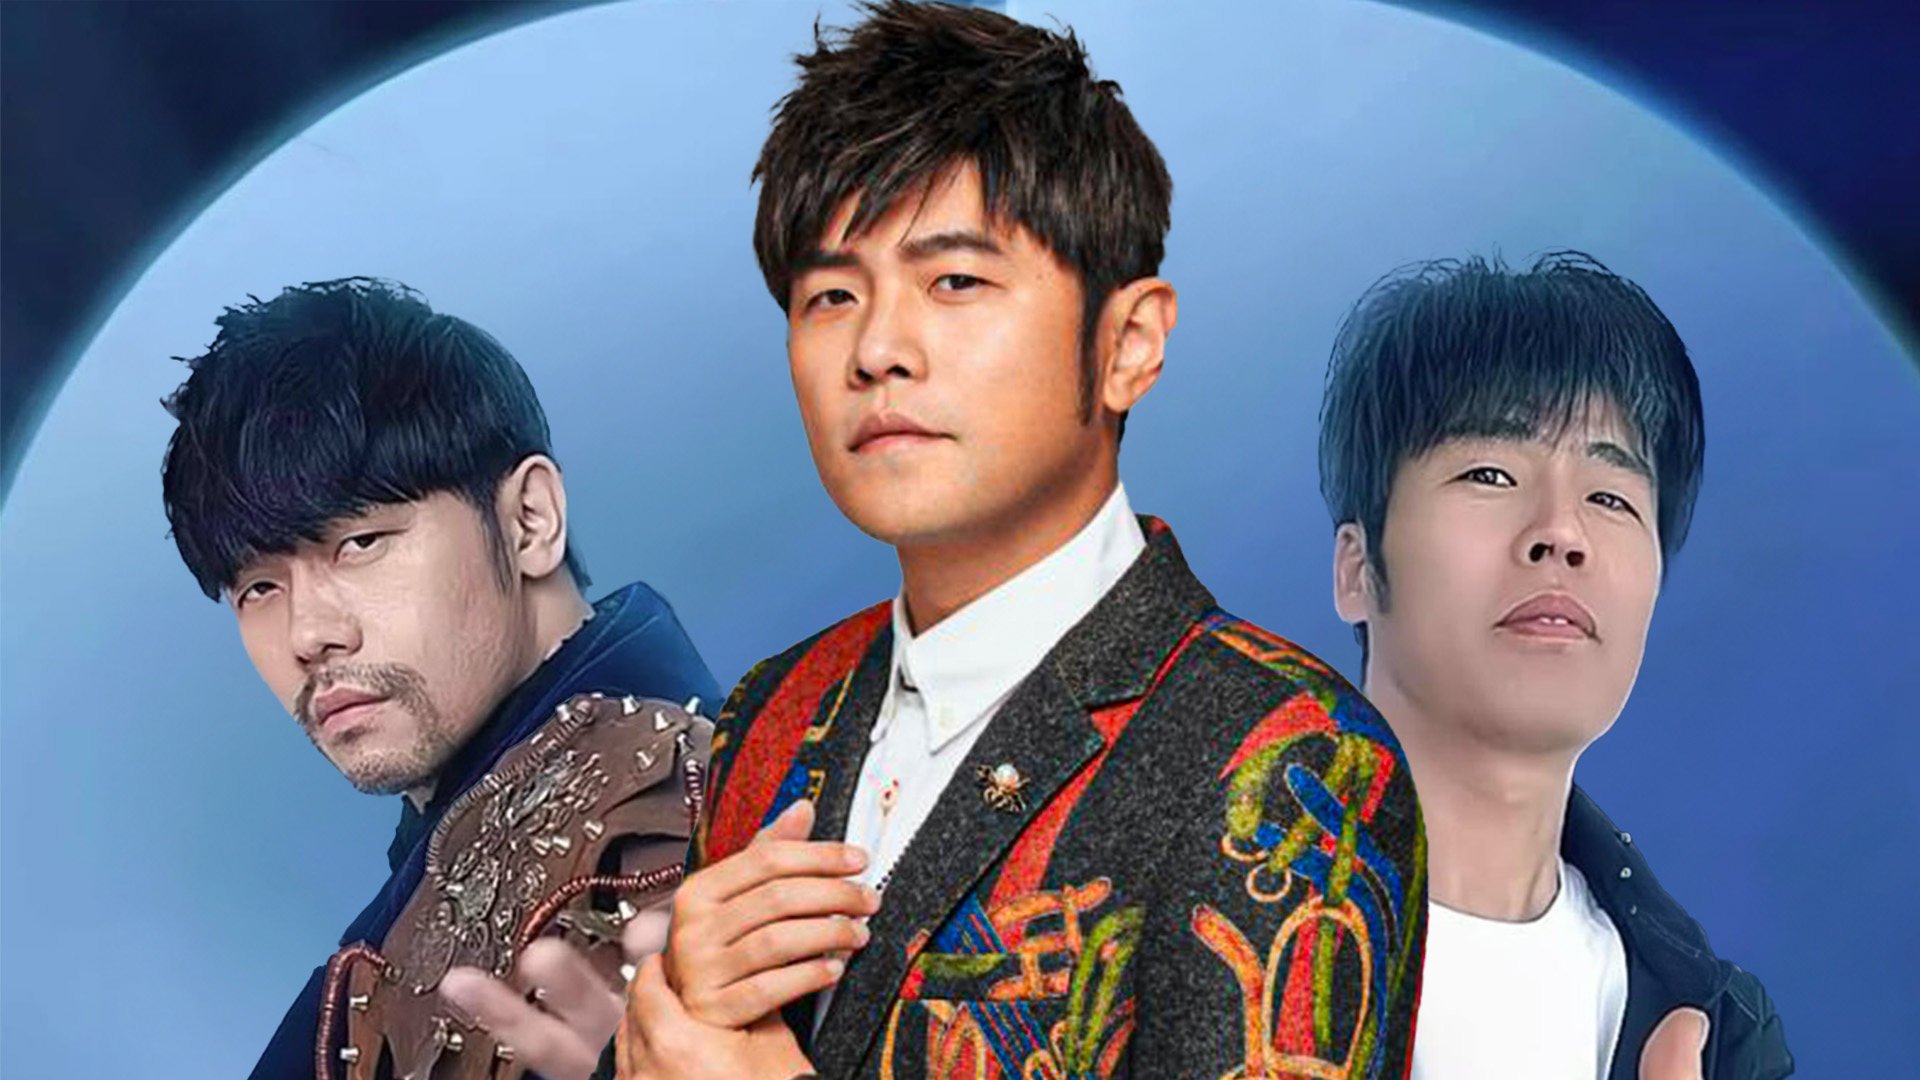 National tours of China by lookalikes of Taiwan singer Jay Chou have sparked heated discussions online about copyright infringements and profiteering. Photo: SCMP composite/Weibo